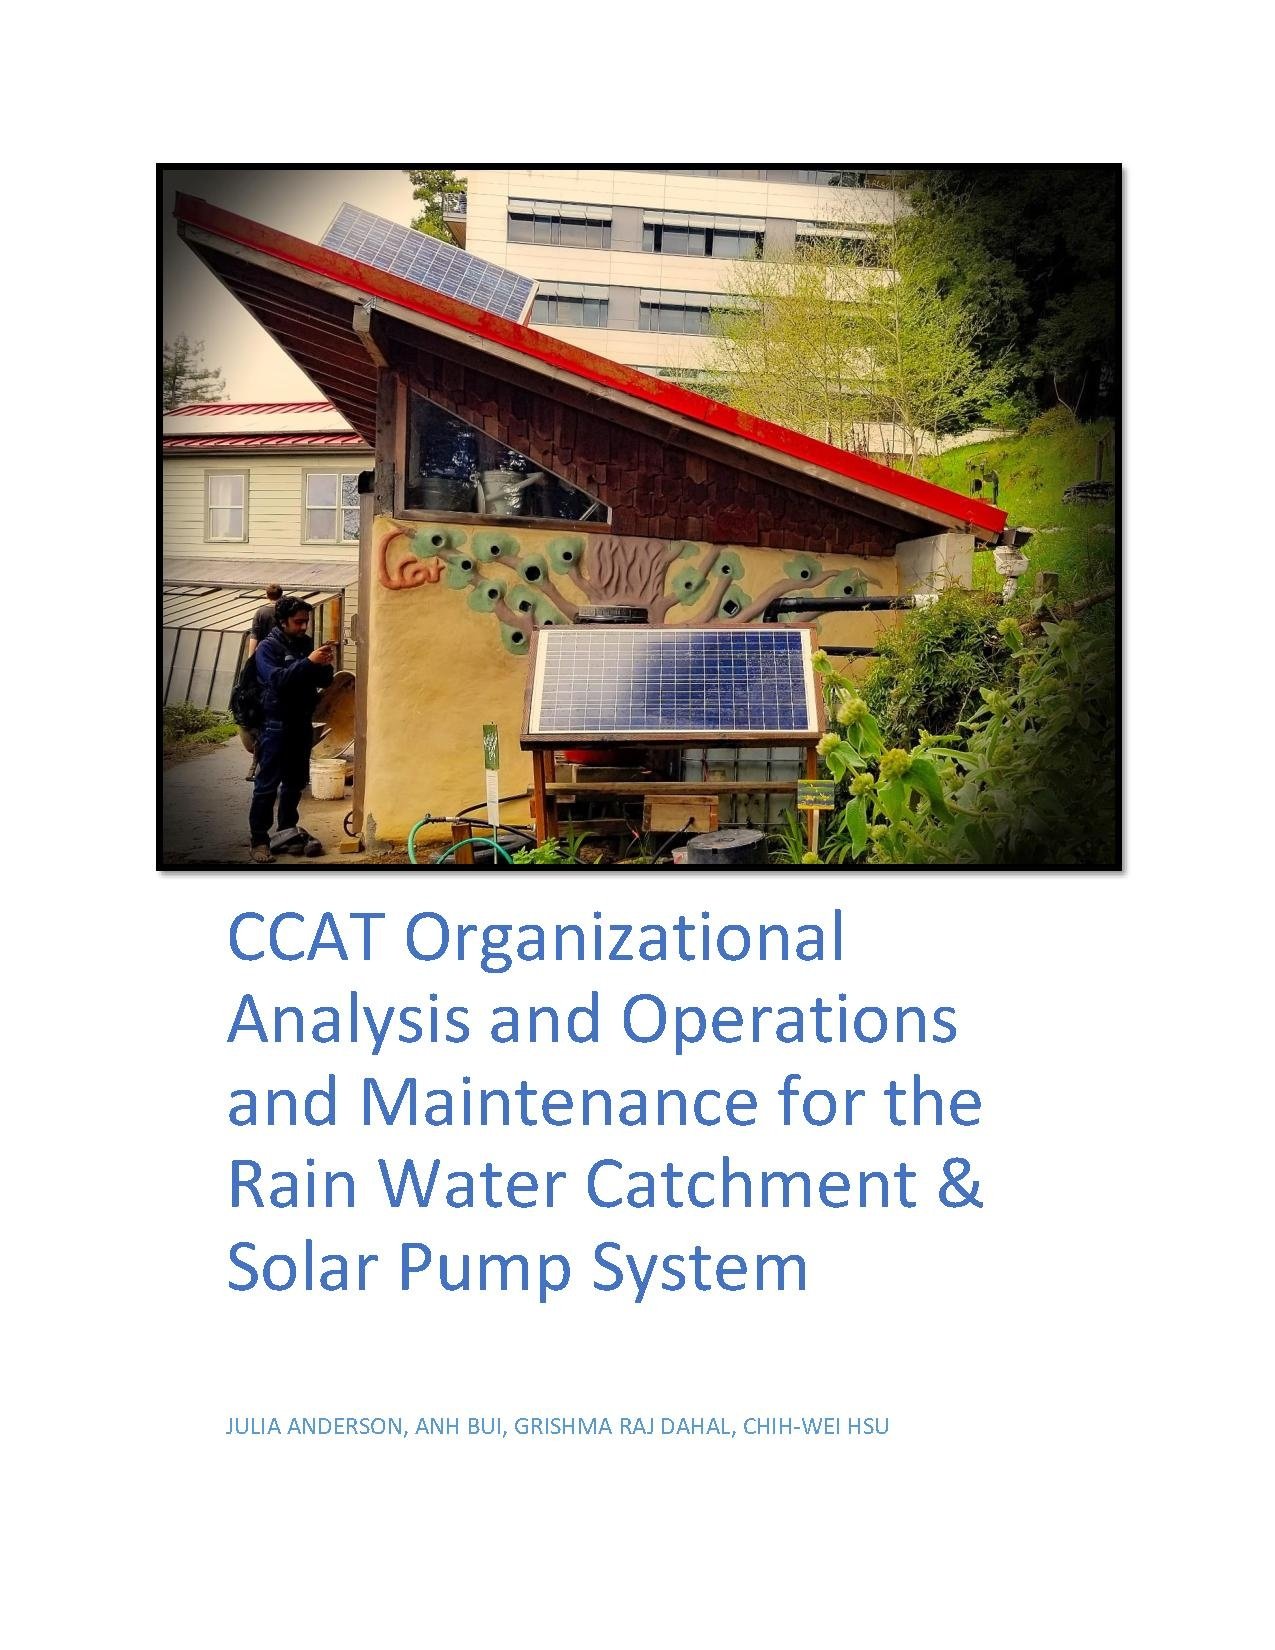 CCAT Organizational Analysis and Operations and Maintenance for the Rain Water Catchment & Solar Pump System